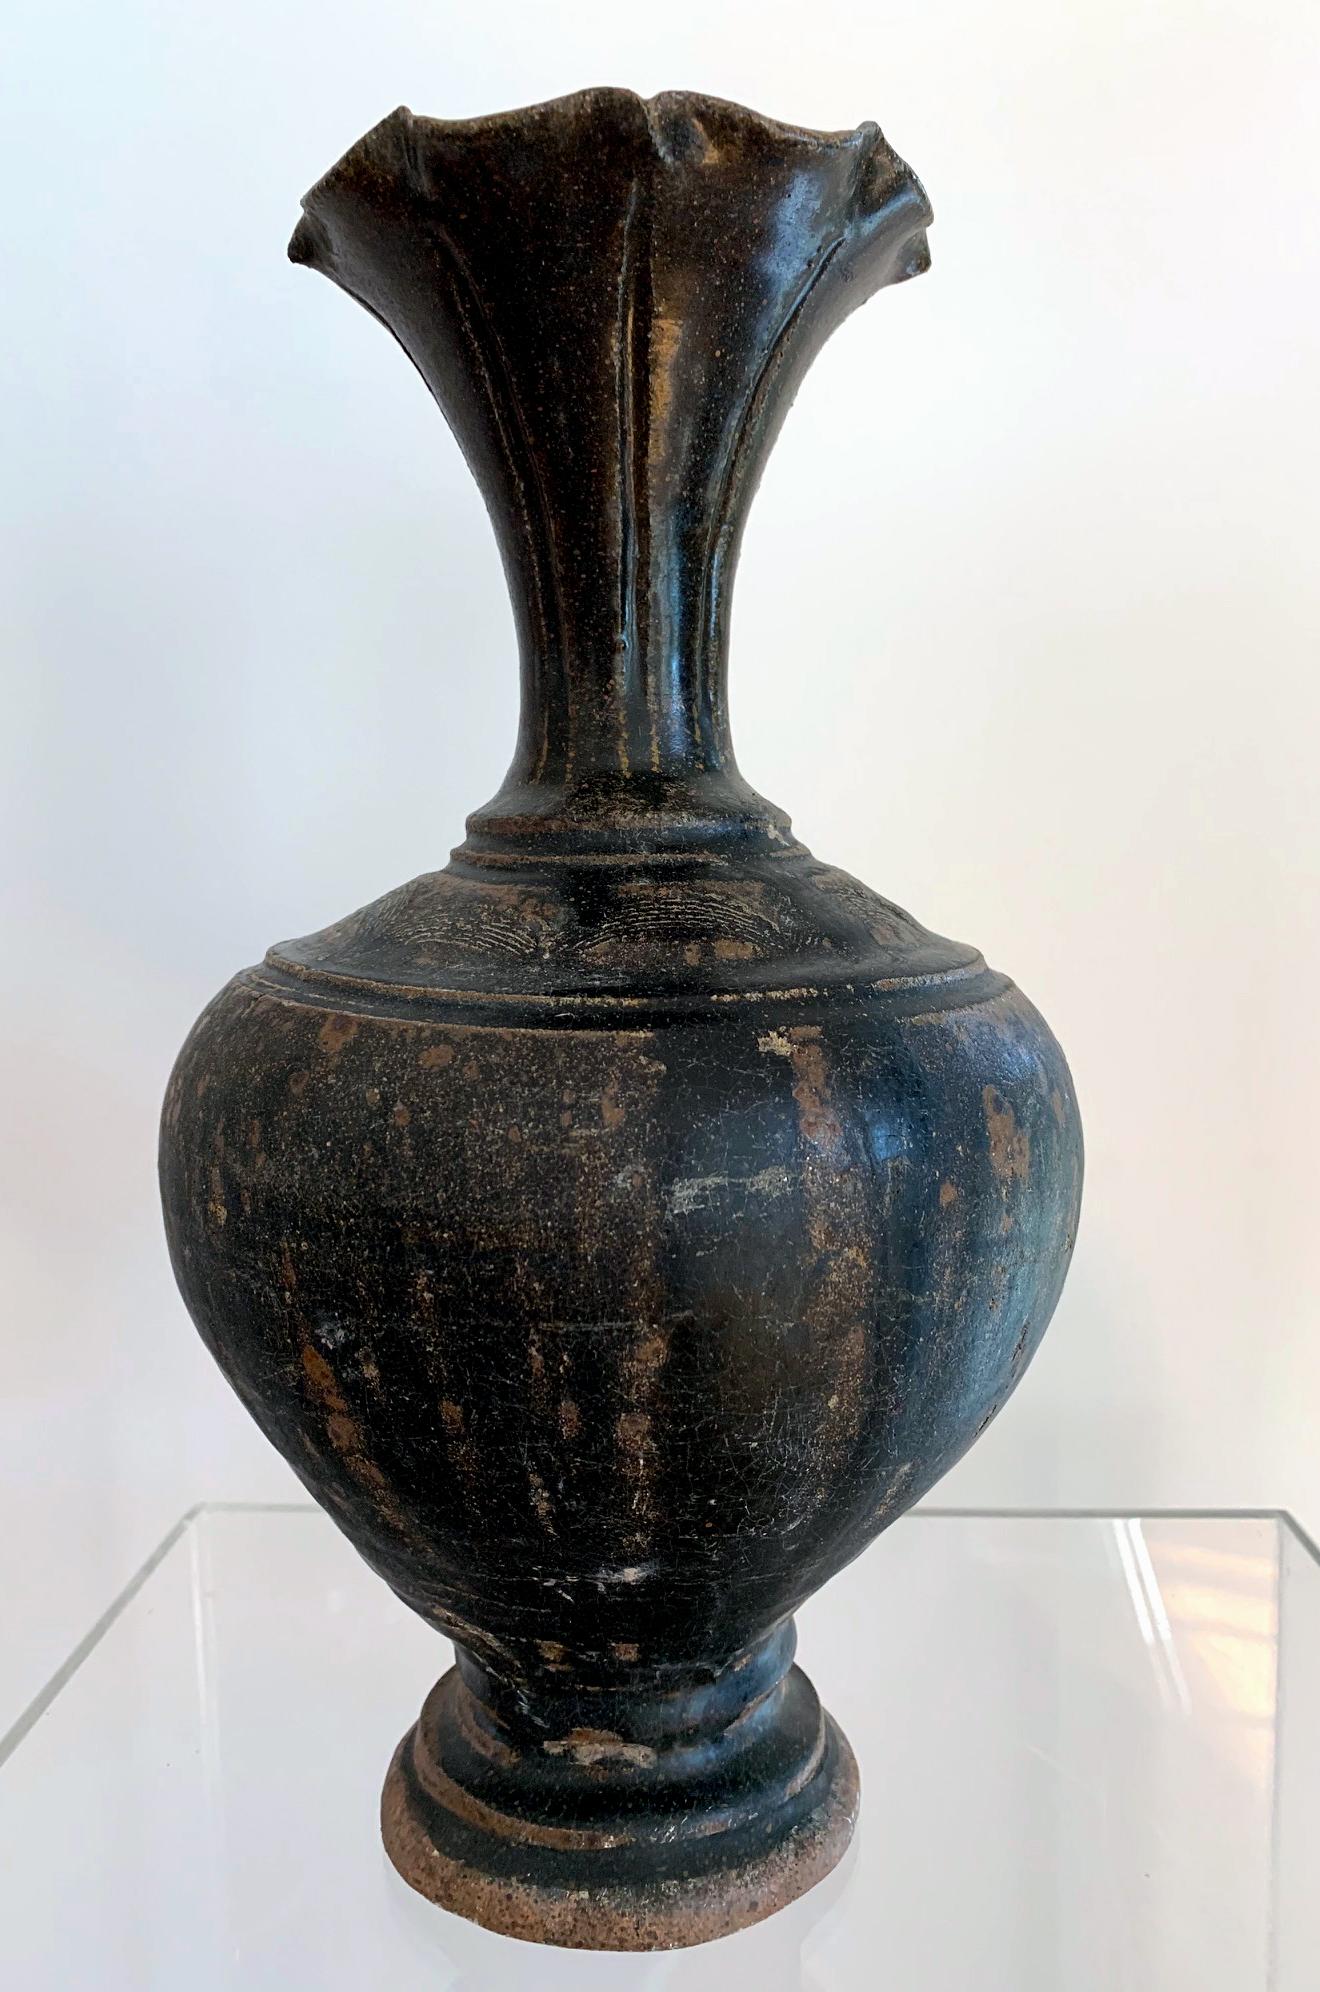 Ceramic vase with black glaze Khmer Angkor Period On offer is a stoneware ceramic vase with black iron glaze from Khmer Kingdom (now Cambodia) dated to Angkor period circa 12th century. The vase is constructed in a very elegant form derived from